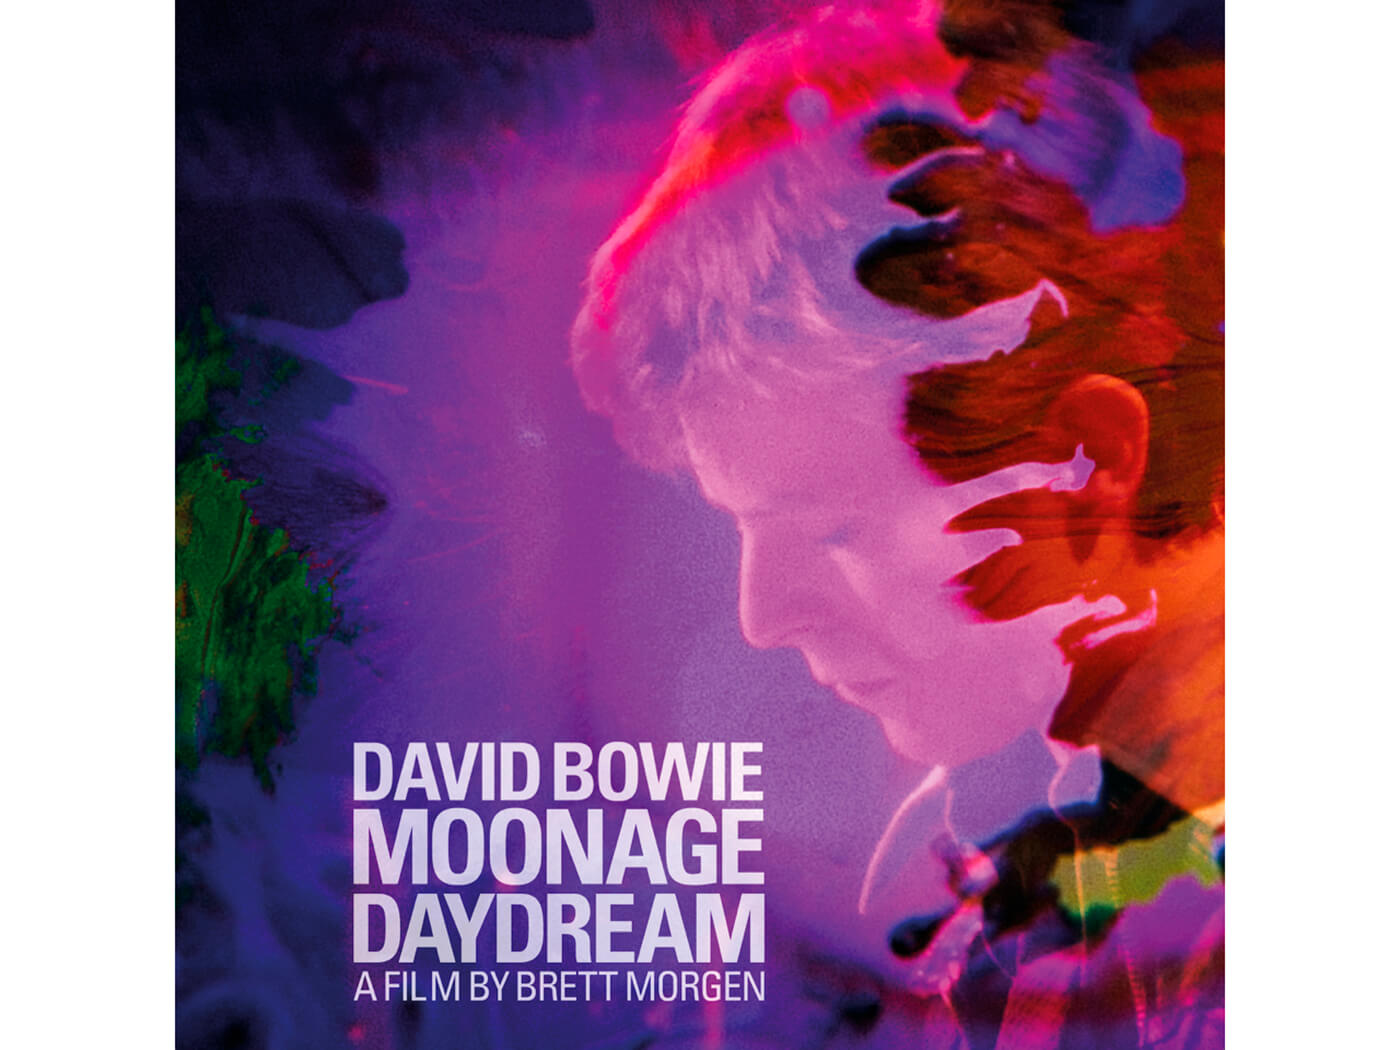 Soundtrack for David Bowie’s Moonage Daydream doc revealed!